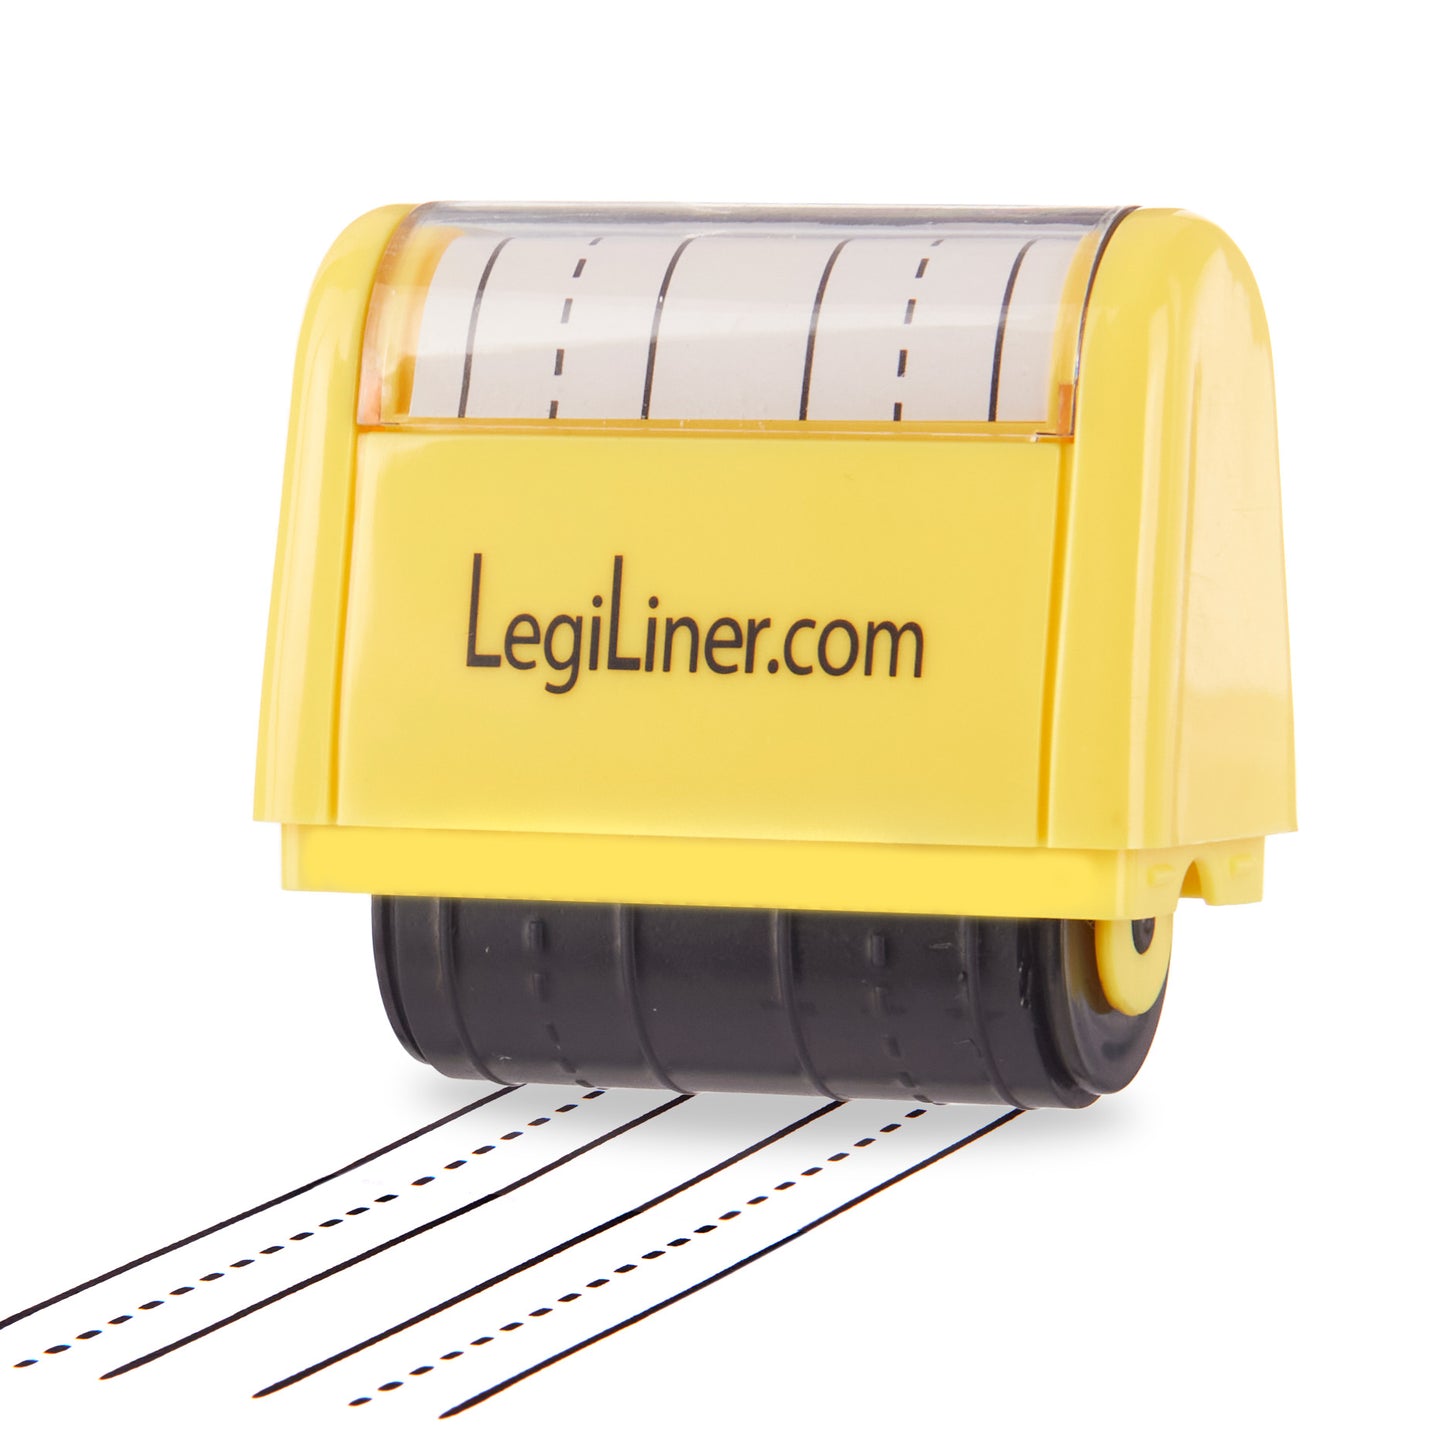 LegiLiner Spacers 1 inch Dashed Line Rolling Ink Stamp with Spaces